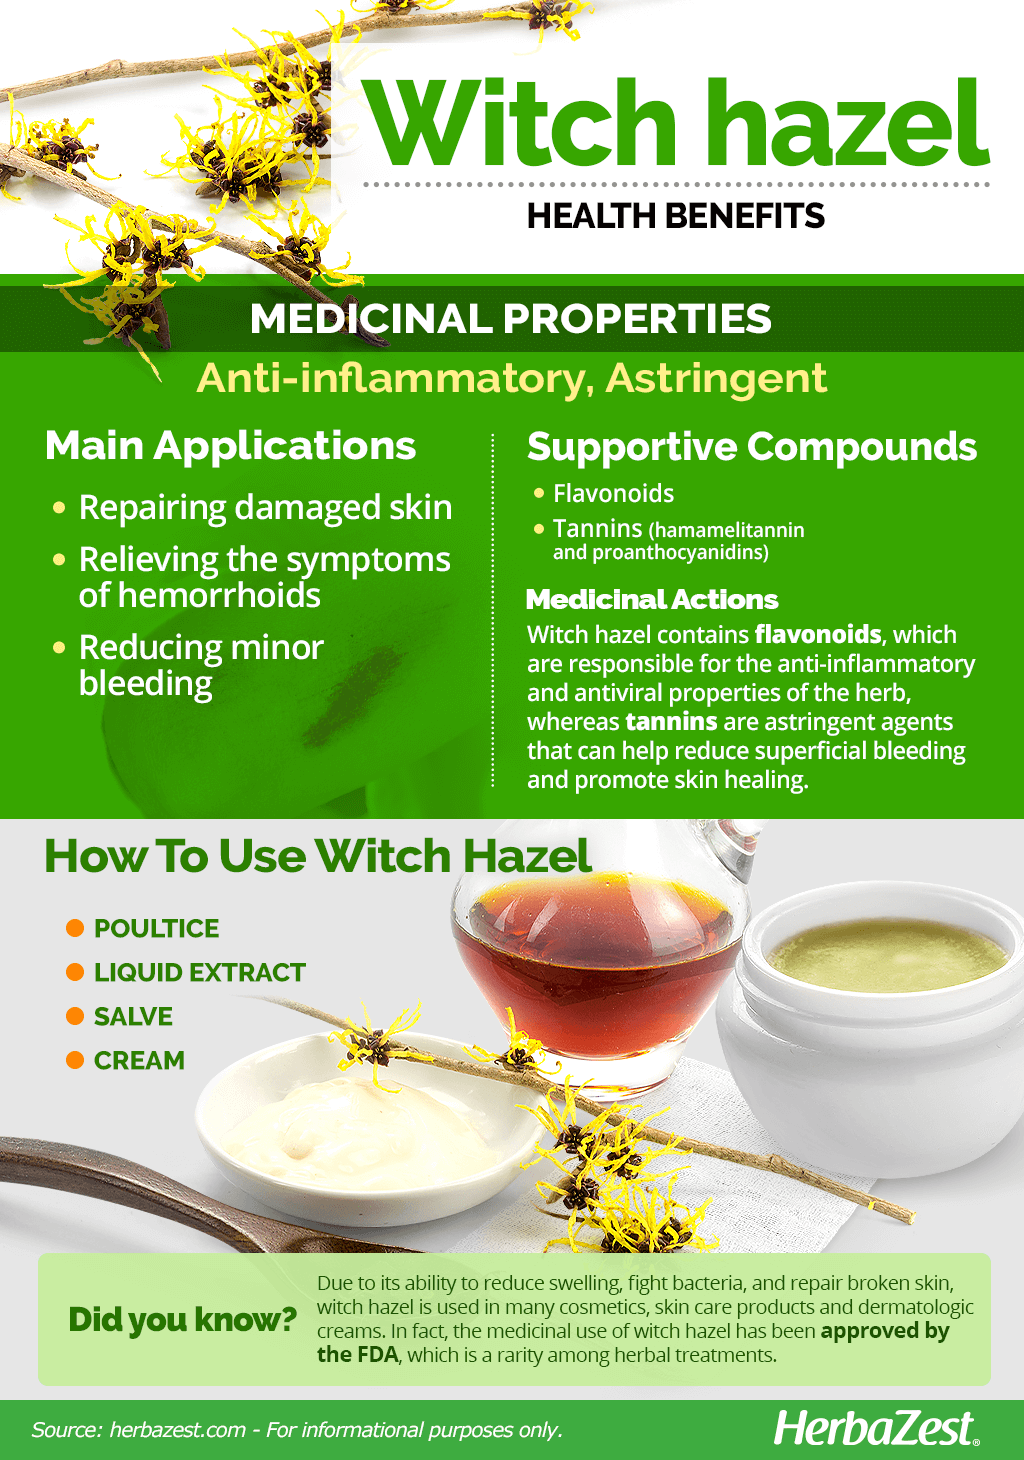 All About Witch Hazel